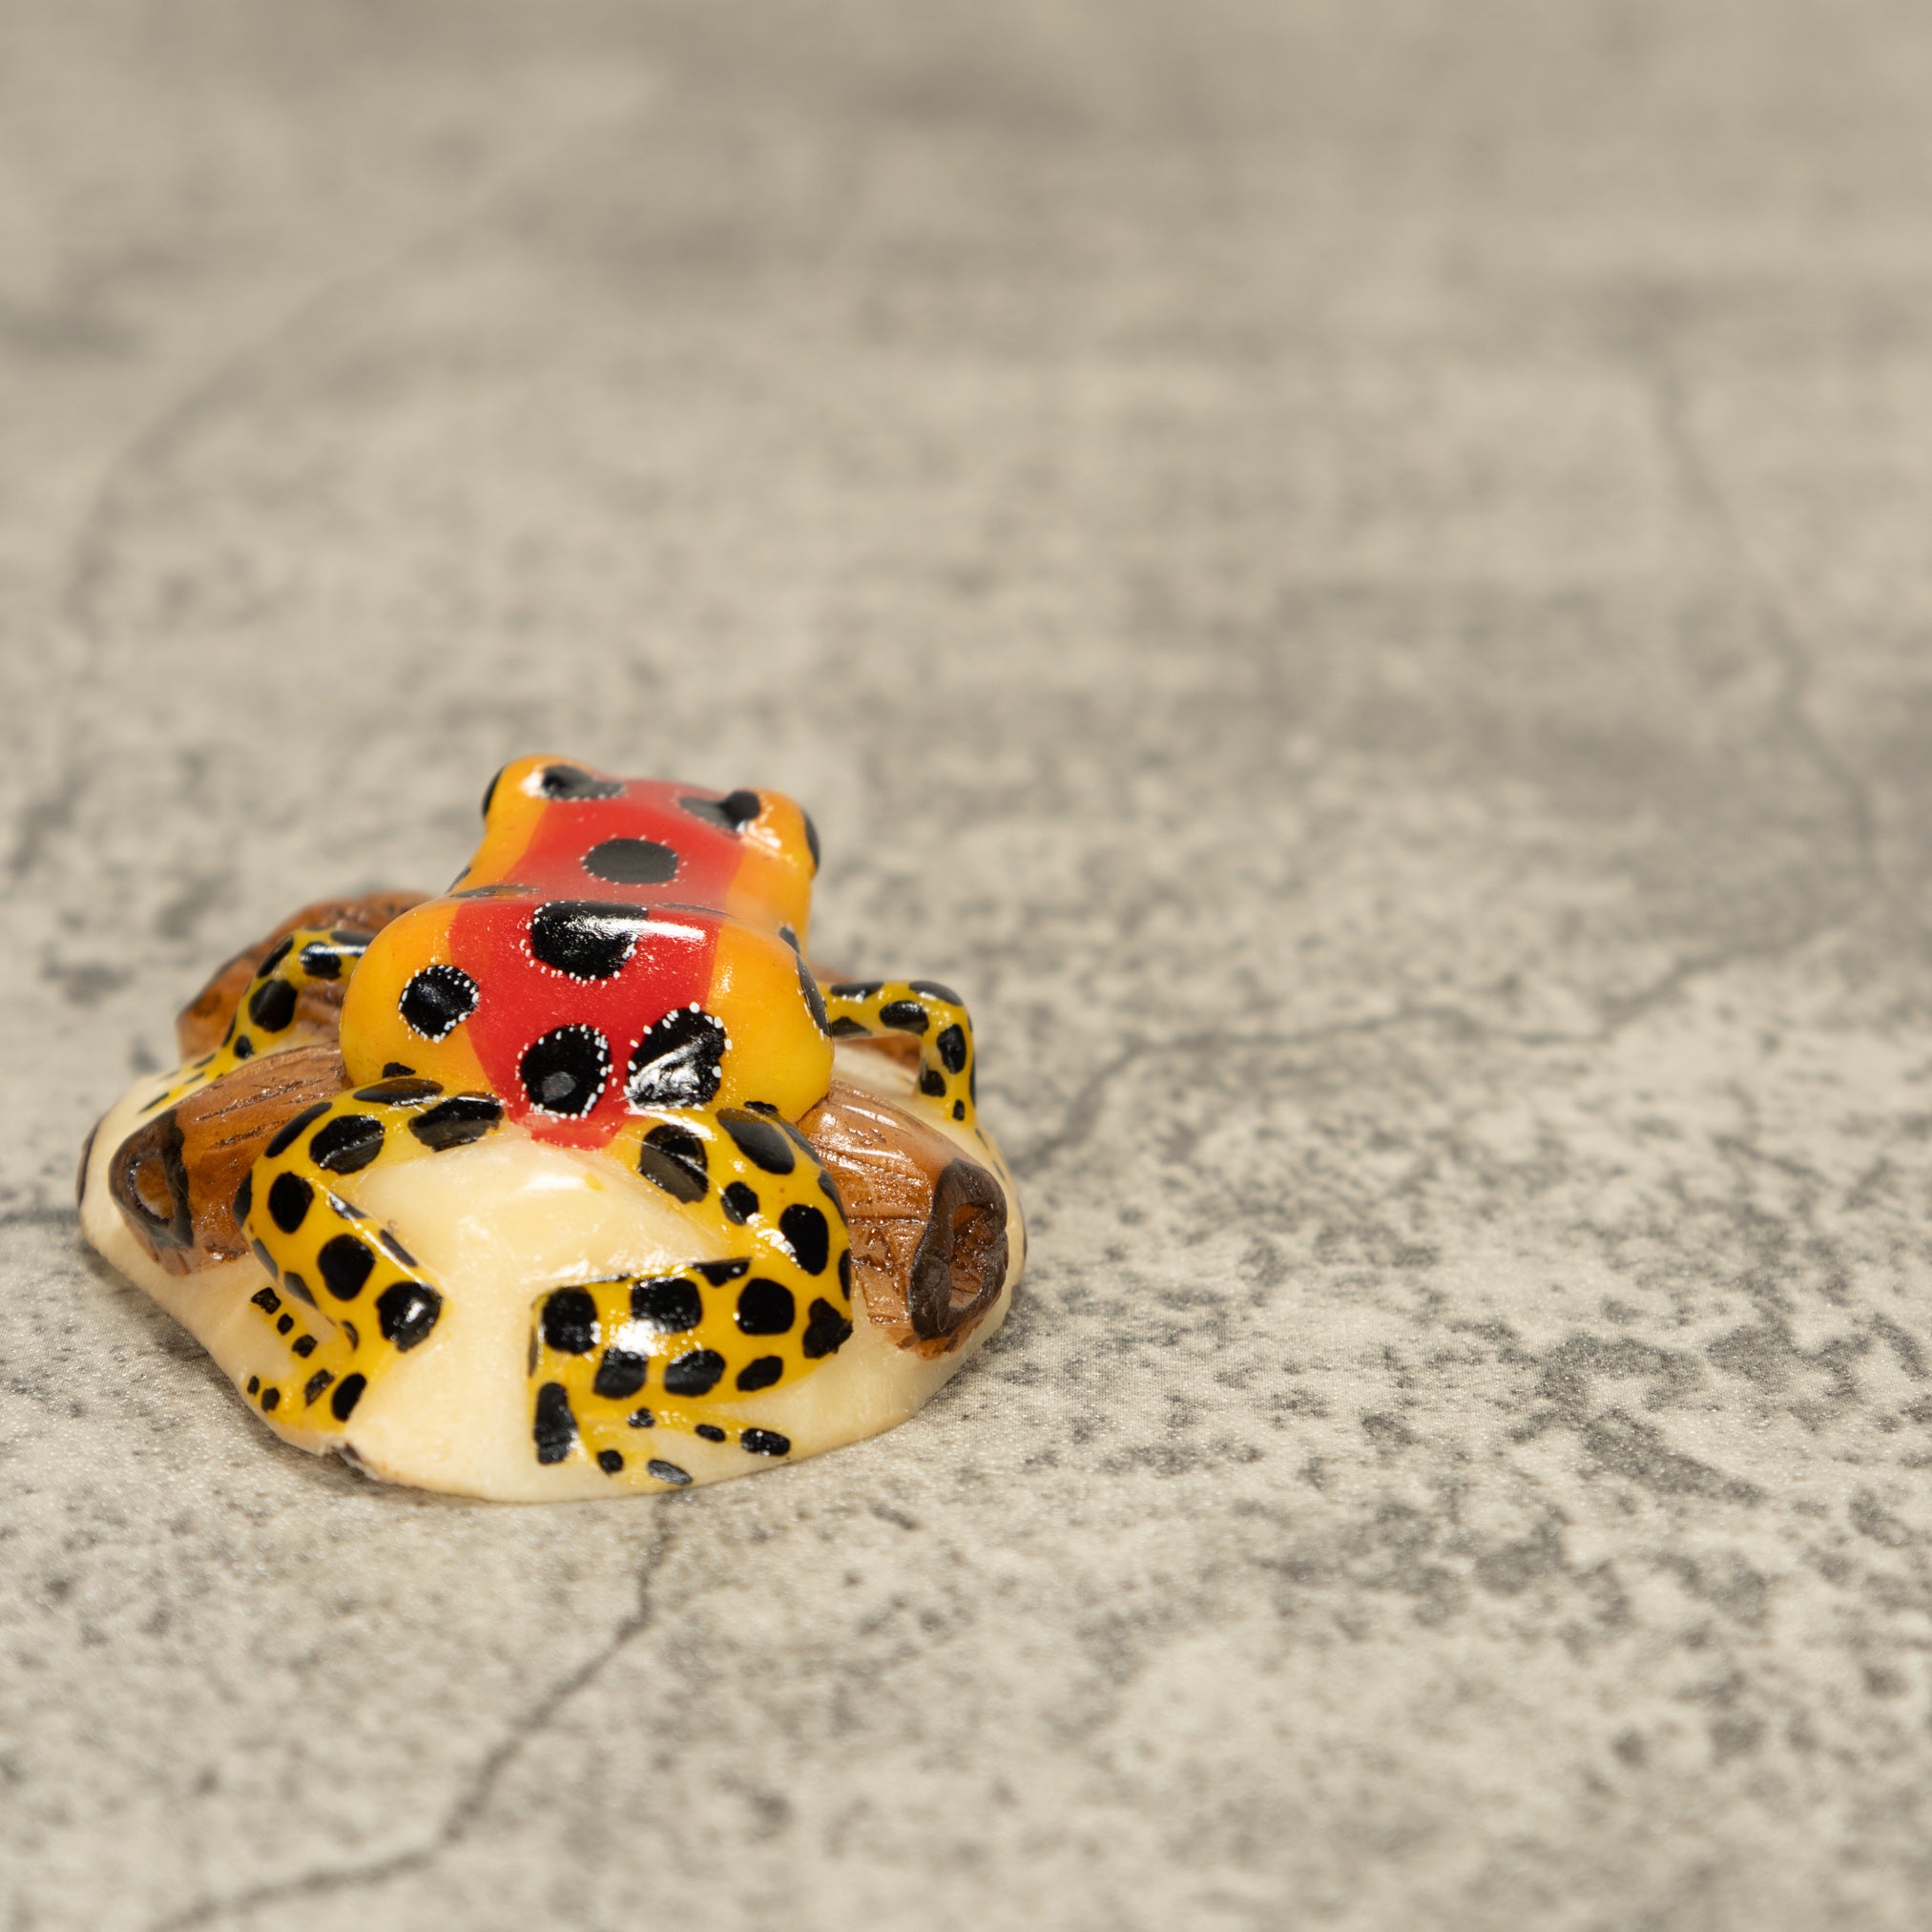 Red Poison Dart Frog On Log Tagua Nut Carving